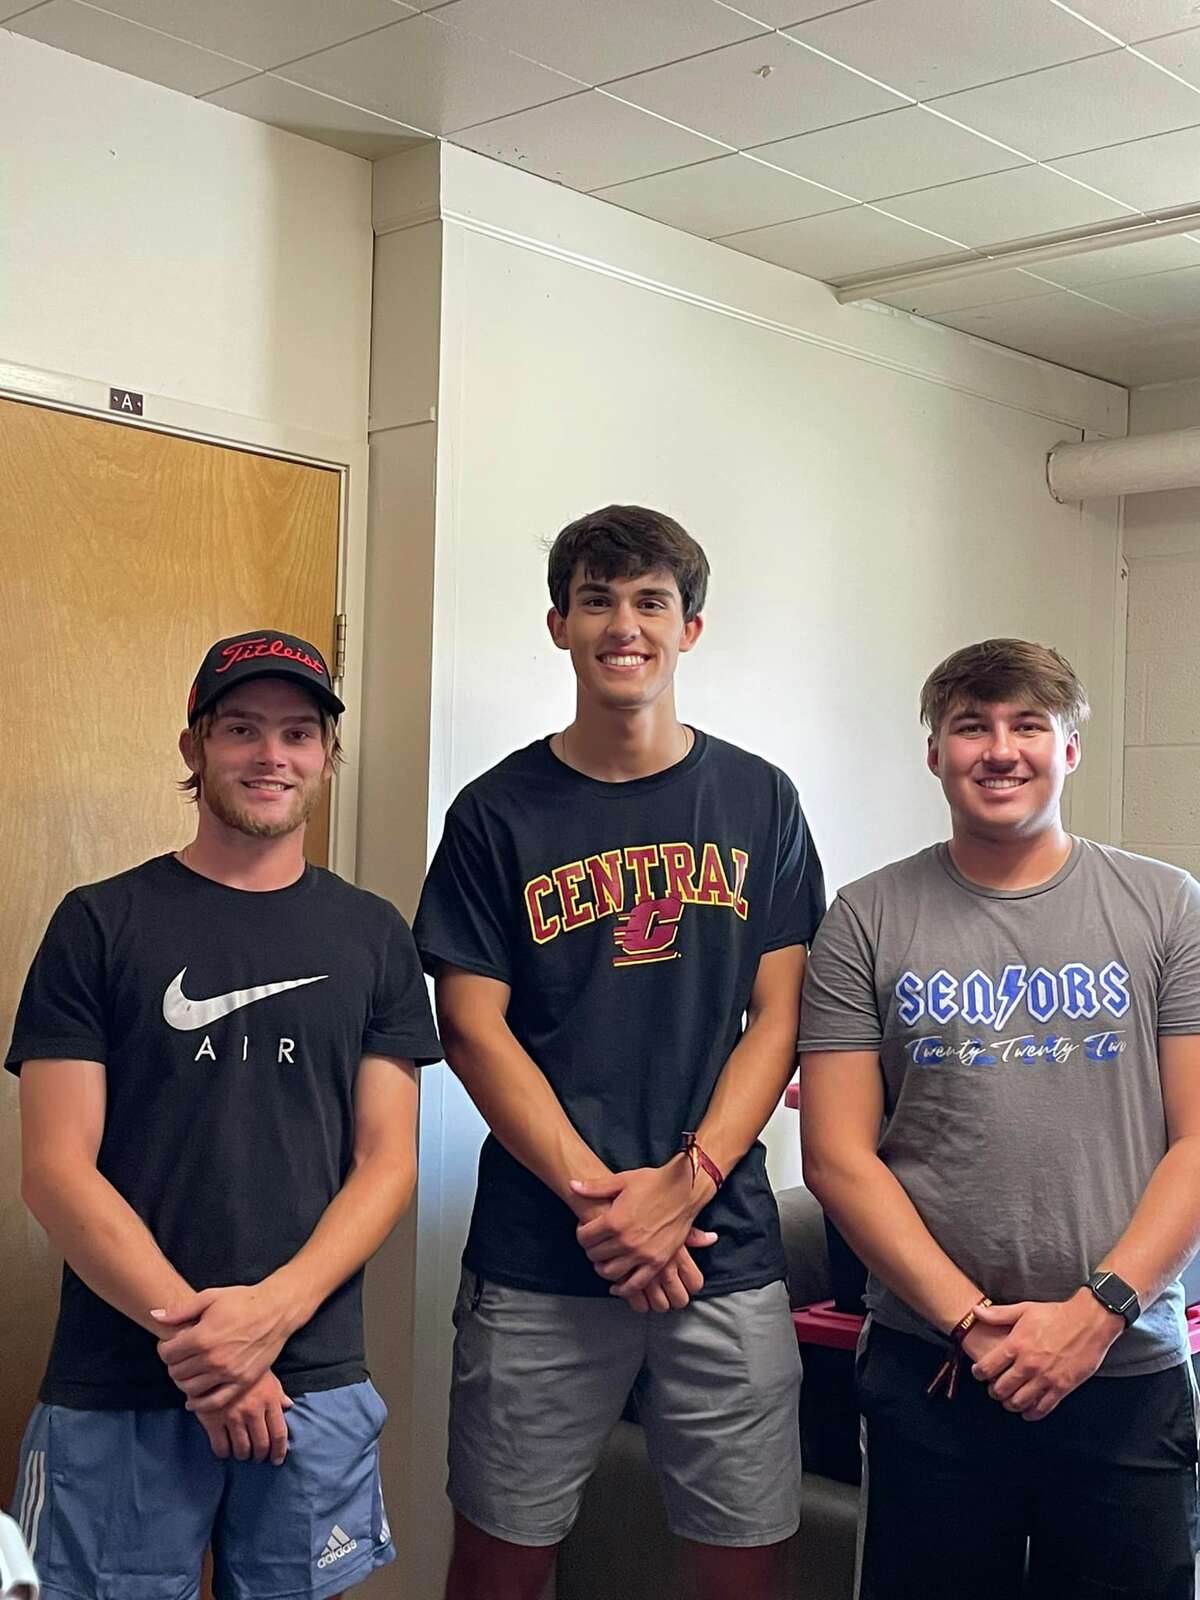 Bad Axe graduate Aaron Sowles, Laker graduate Dylan Wehner, and Croswell-Lexington graduate Peyton Edwards (right) currently are roommates at Central Michigan University.